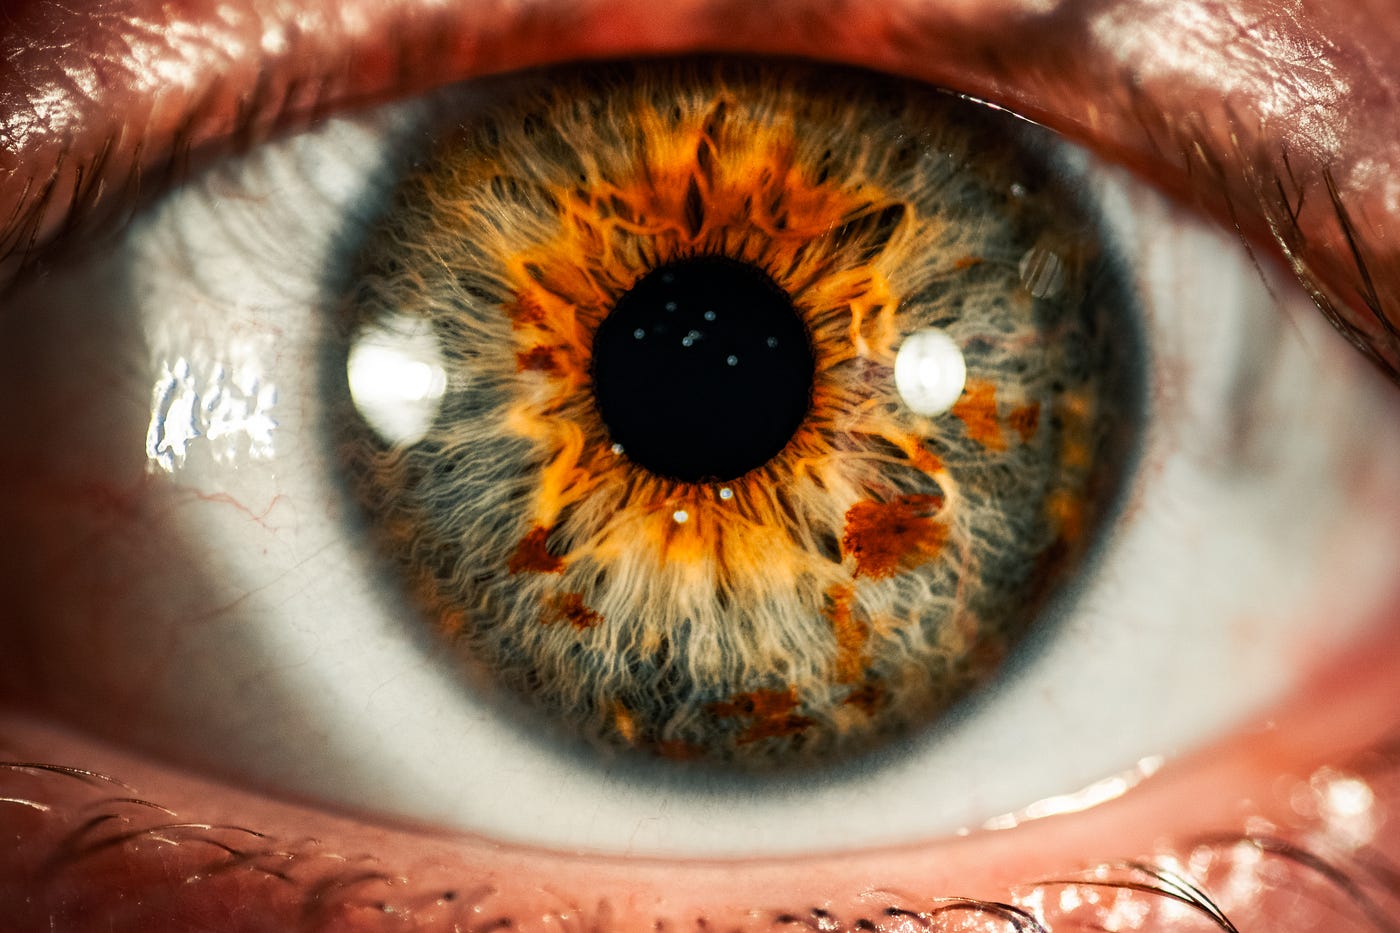 Close-up of an eye. Dietary supplements can reduce the risk of age-related macular degeneration.